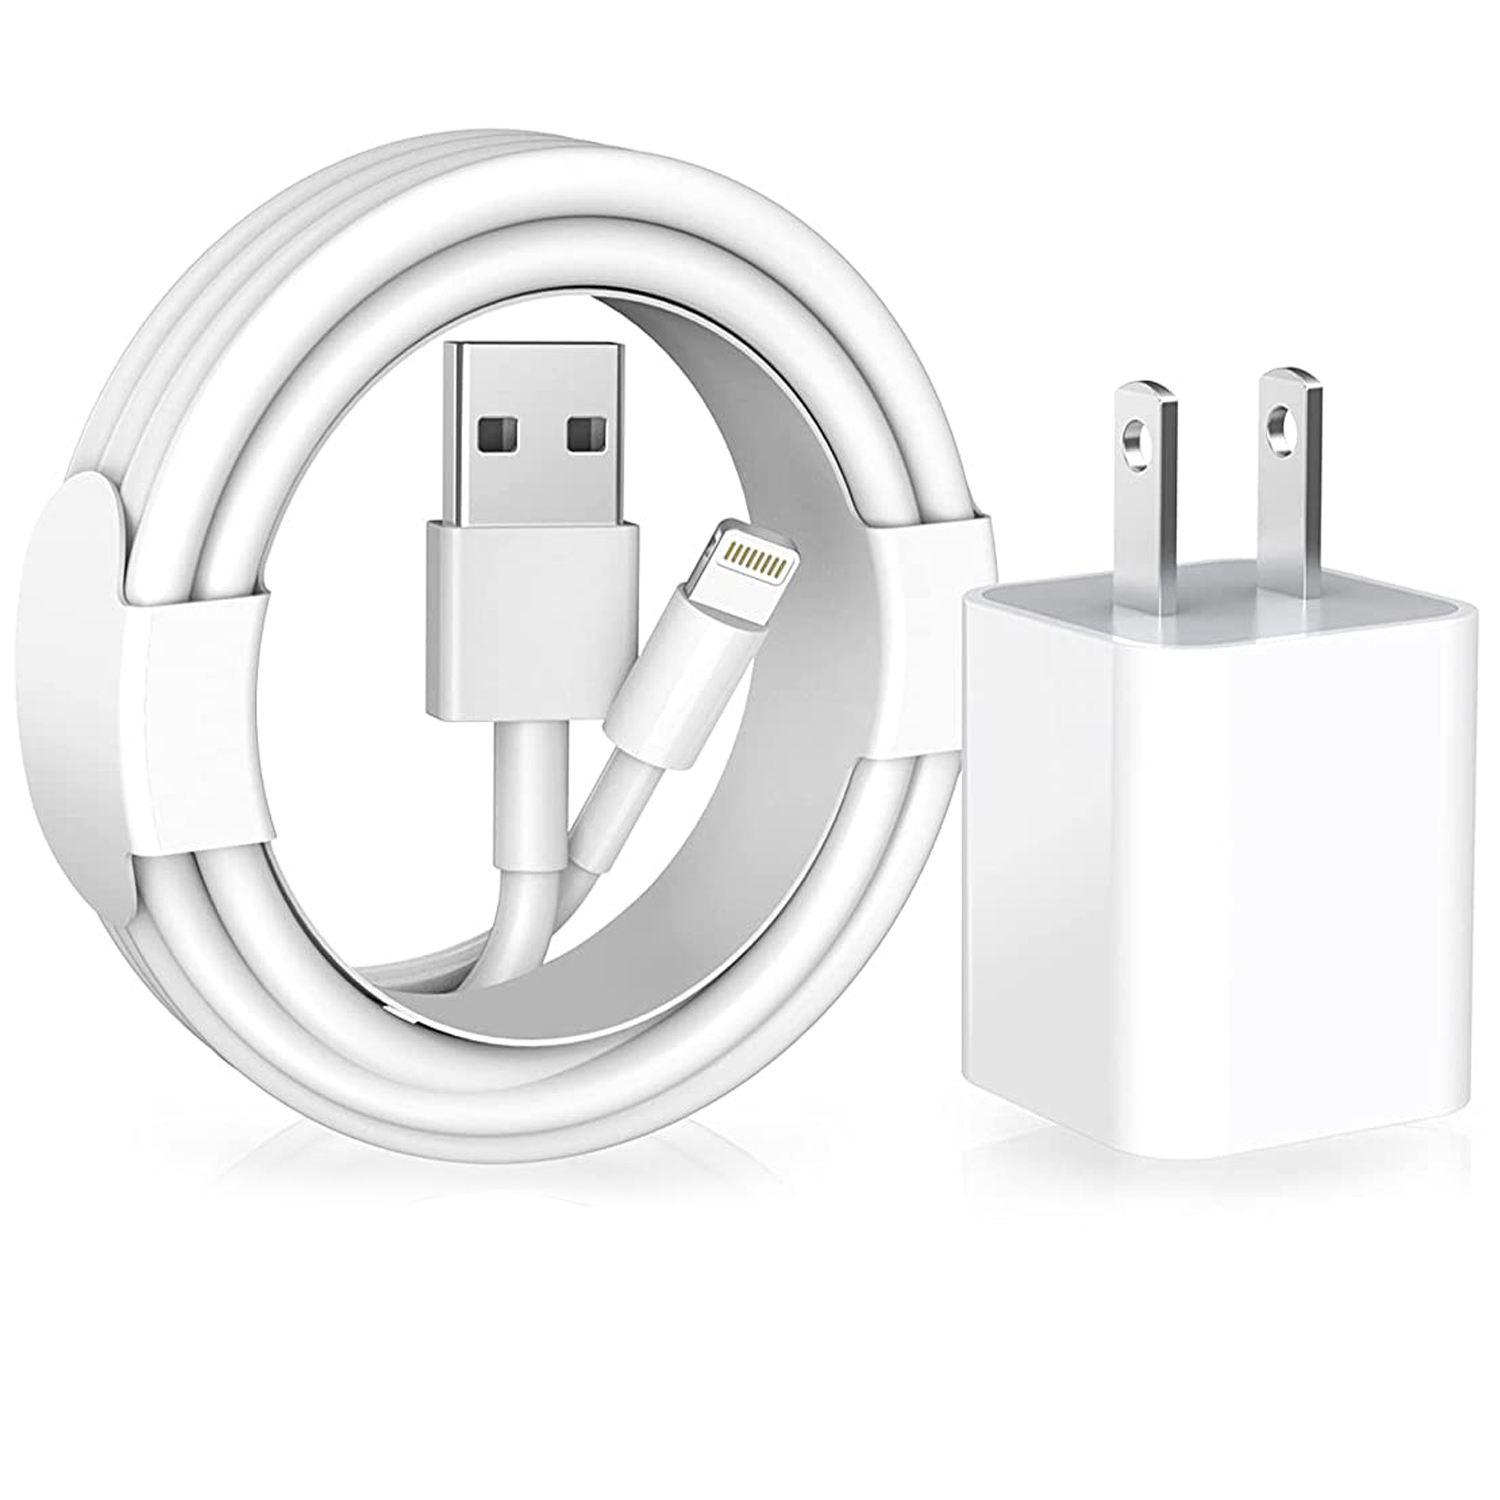 iPhone Charger, Lightning Cable Compatible For Apple Charging Cords & Fast Quick USB Wall Charger Travel Plug Adapter Compatible with iPhone 12/11 Pro/11/XS MAX/XR/8/7/6s/6 Plus/AirPods